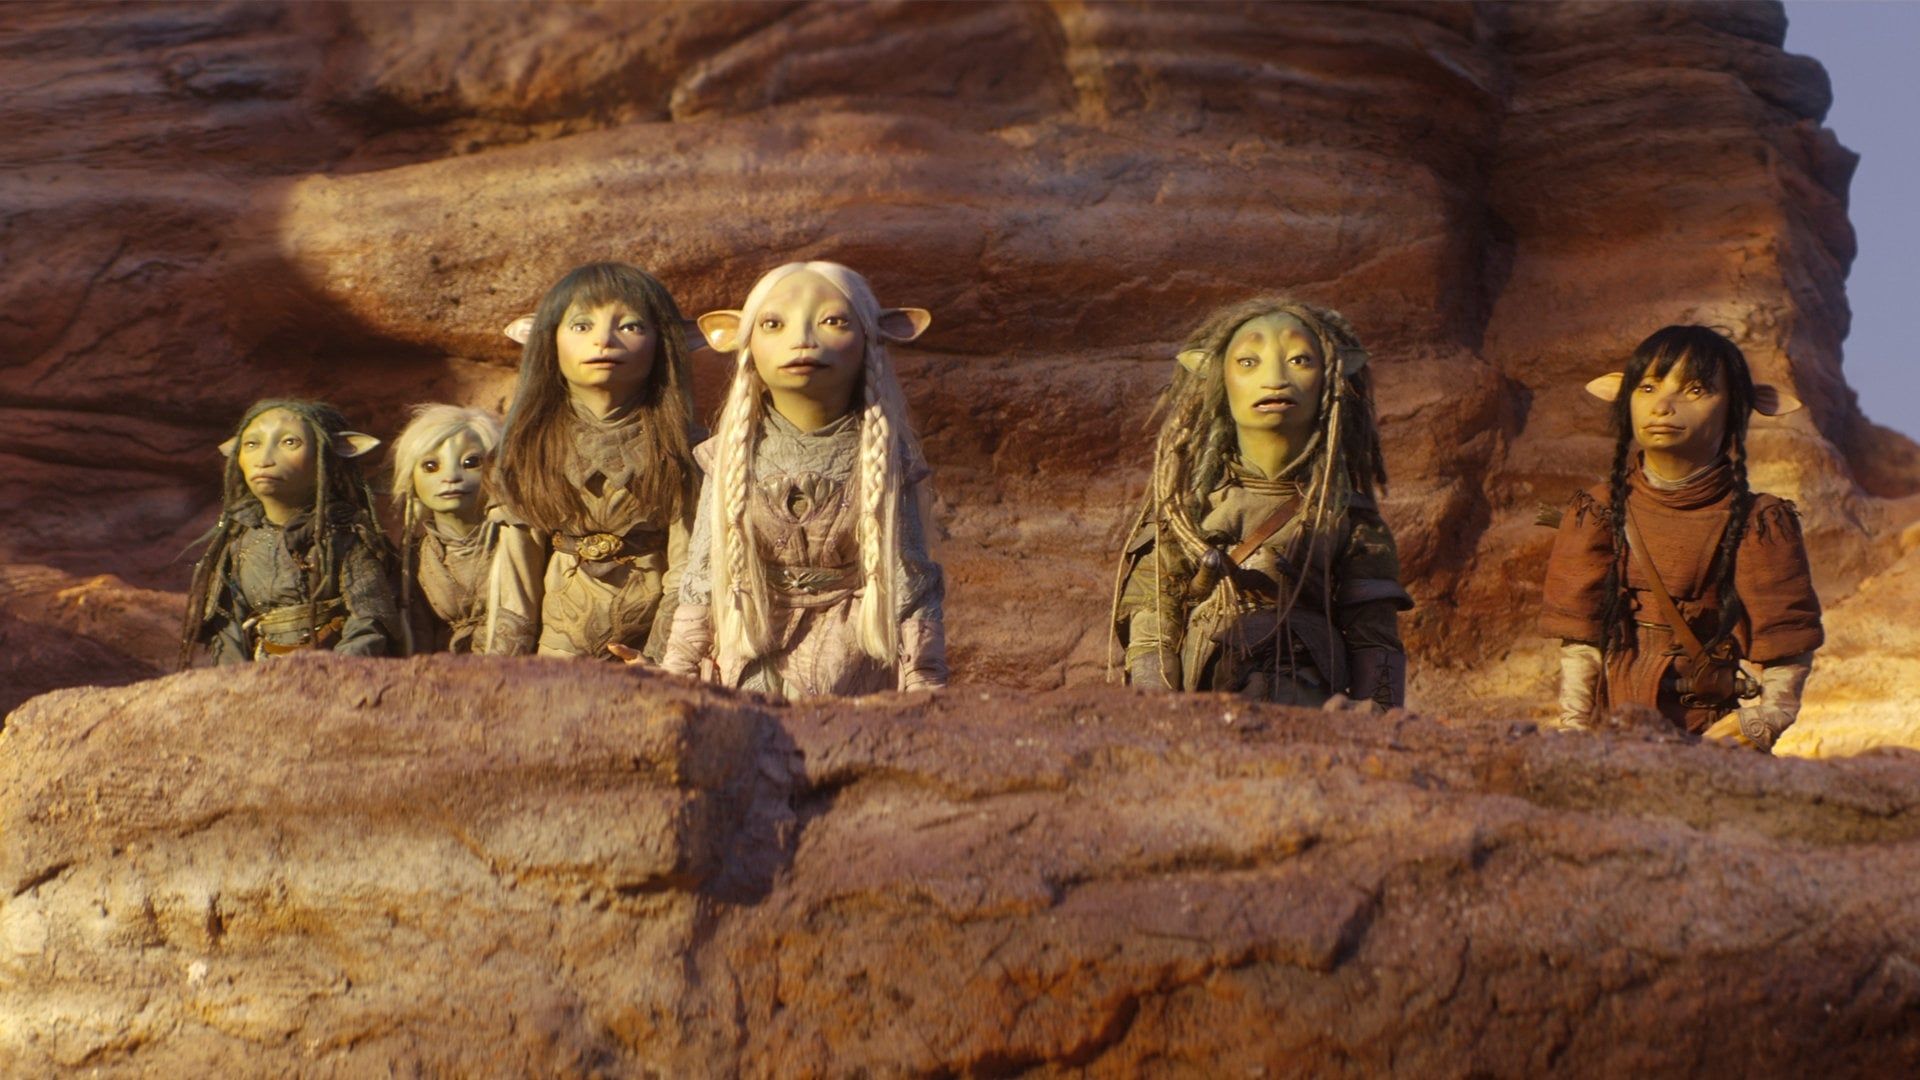 The Dark Crystal: Age of Resistance background